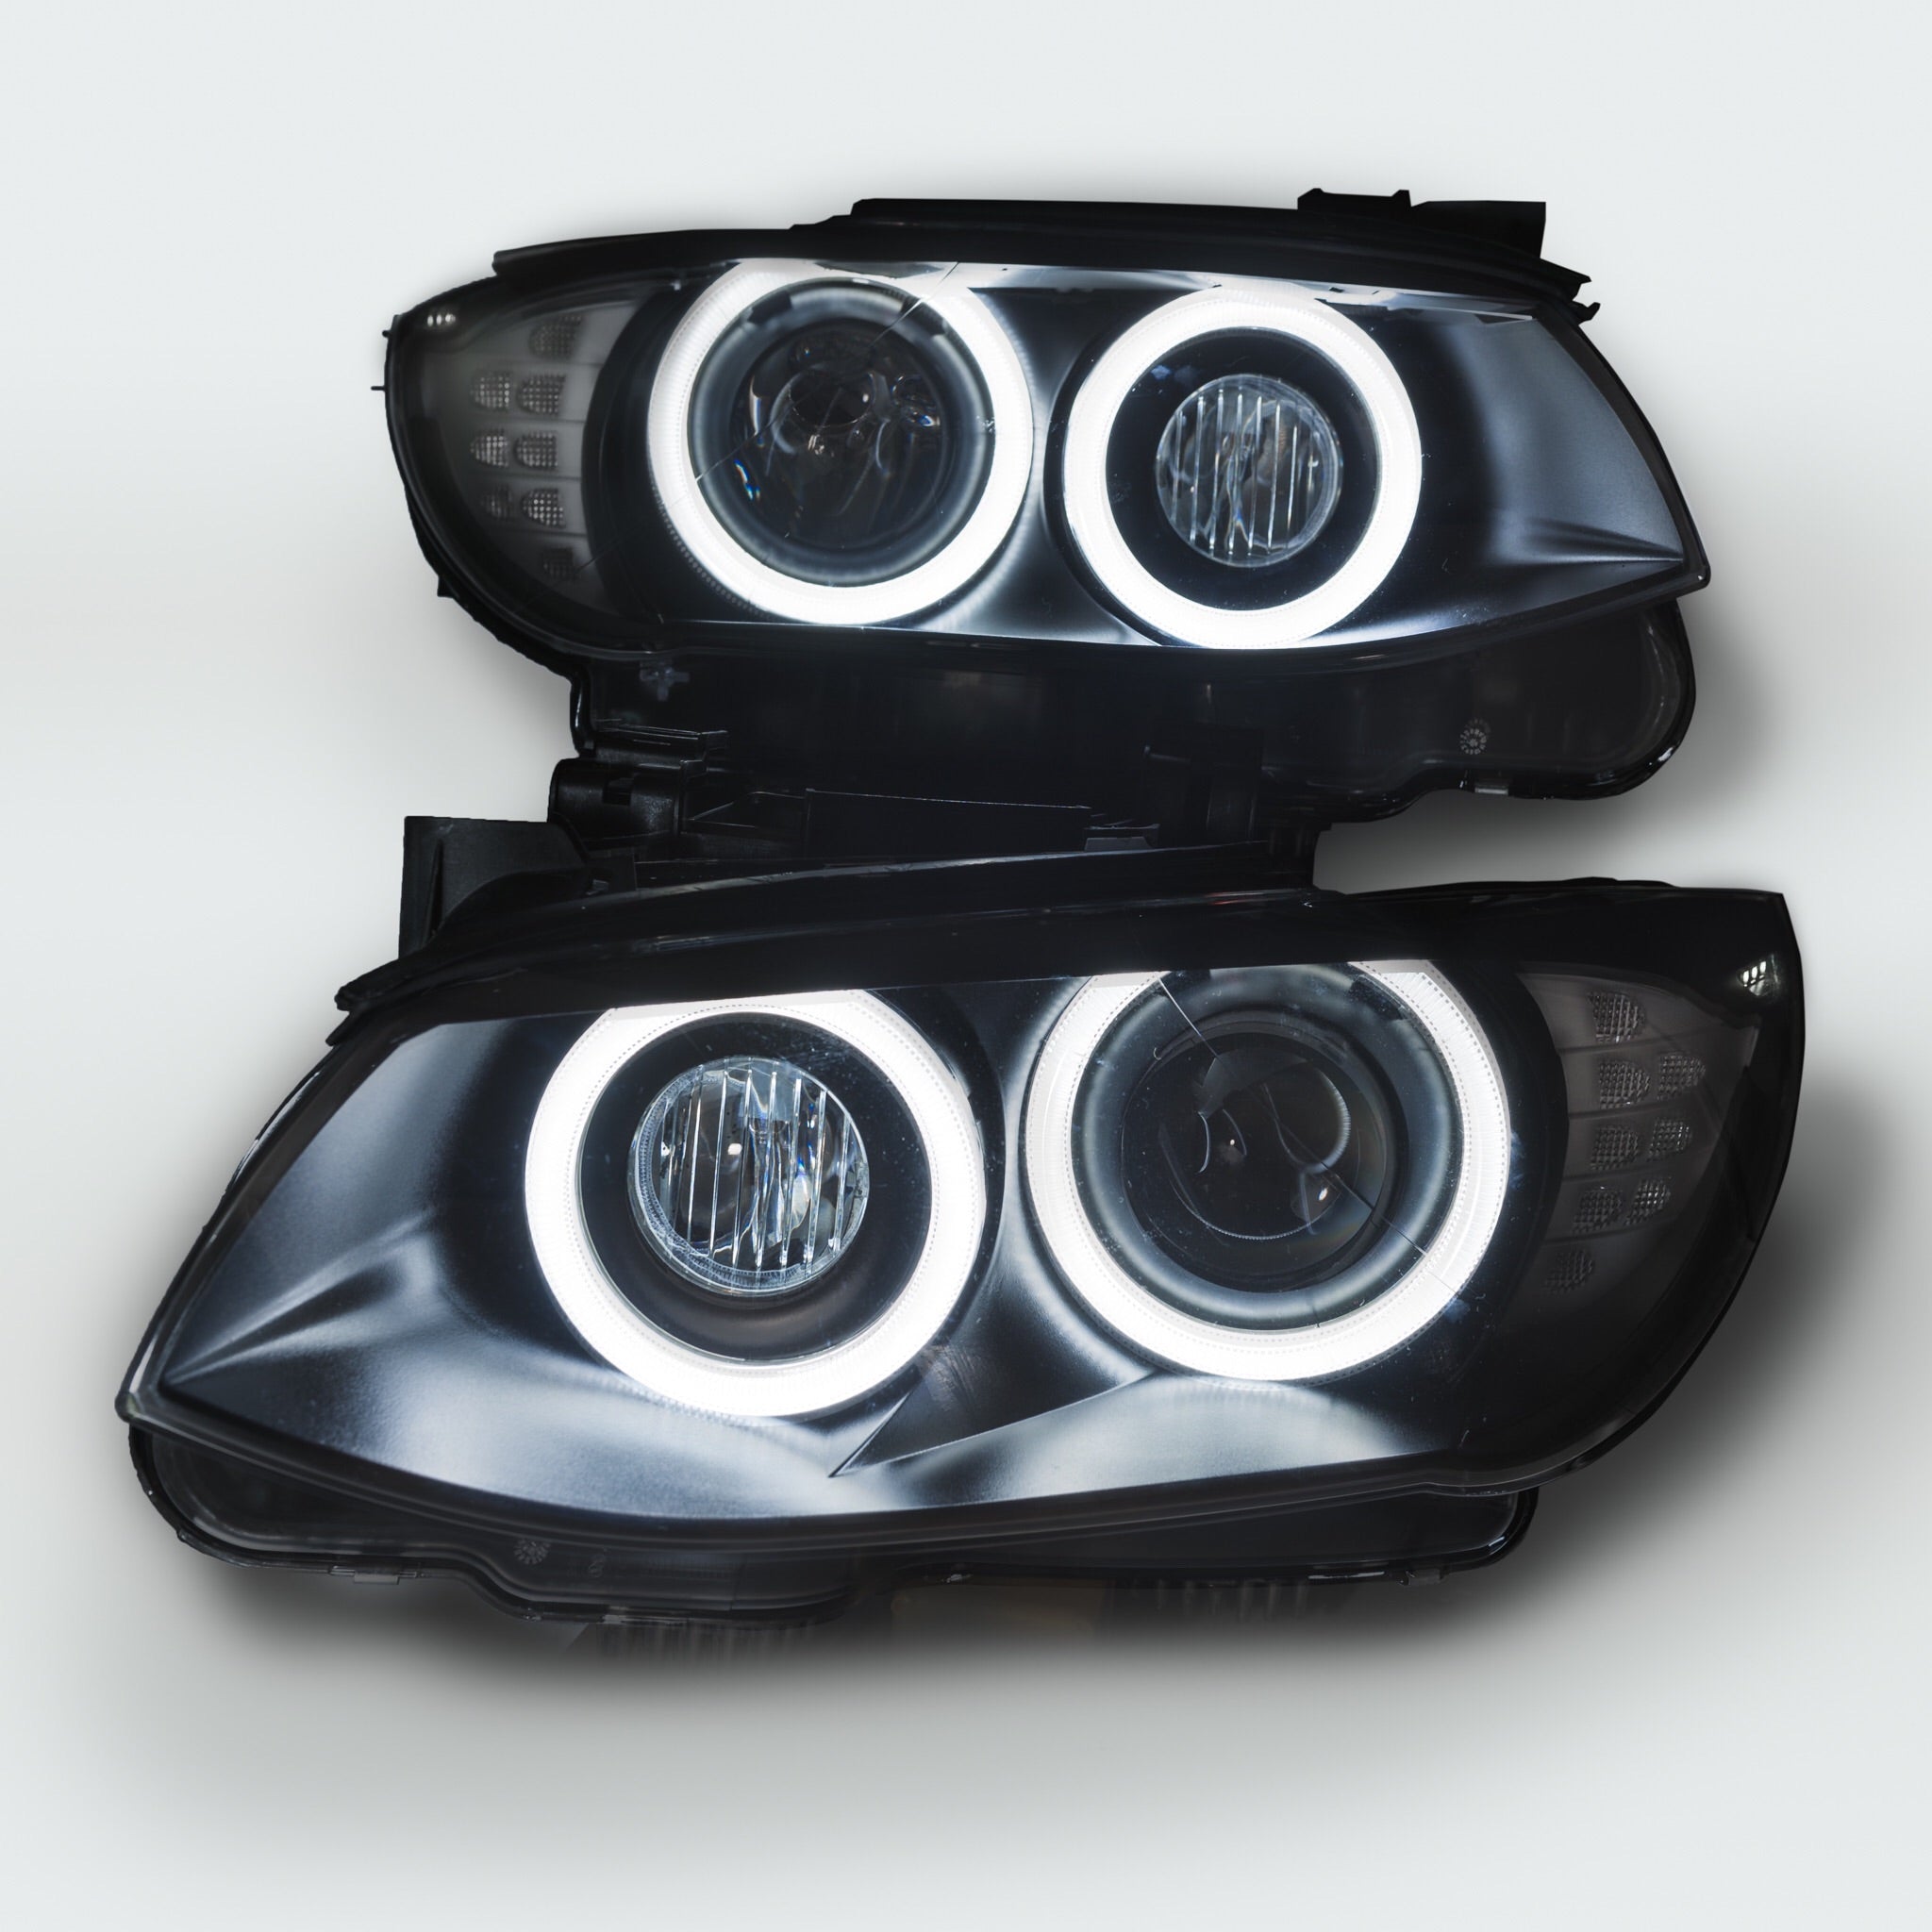 READY TO SHIP PRE-BUILT LCI E92 E93 3 Series Coupe & Convertible Round Ring Headlights (2011 - 2013 Only)